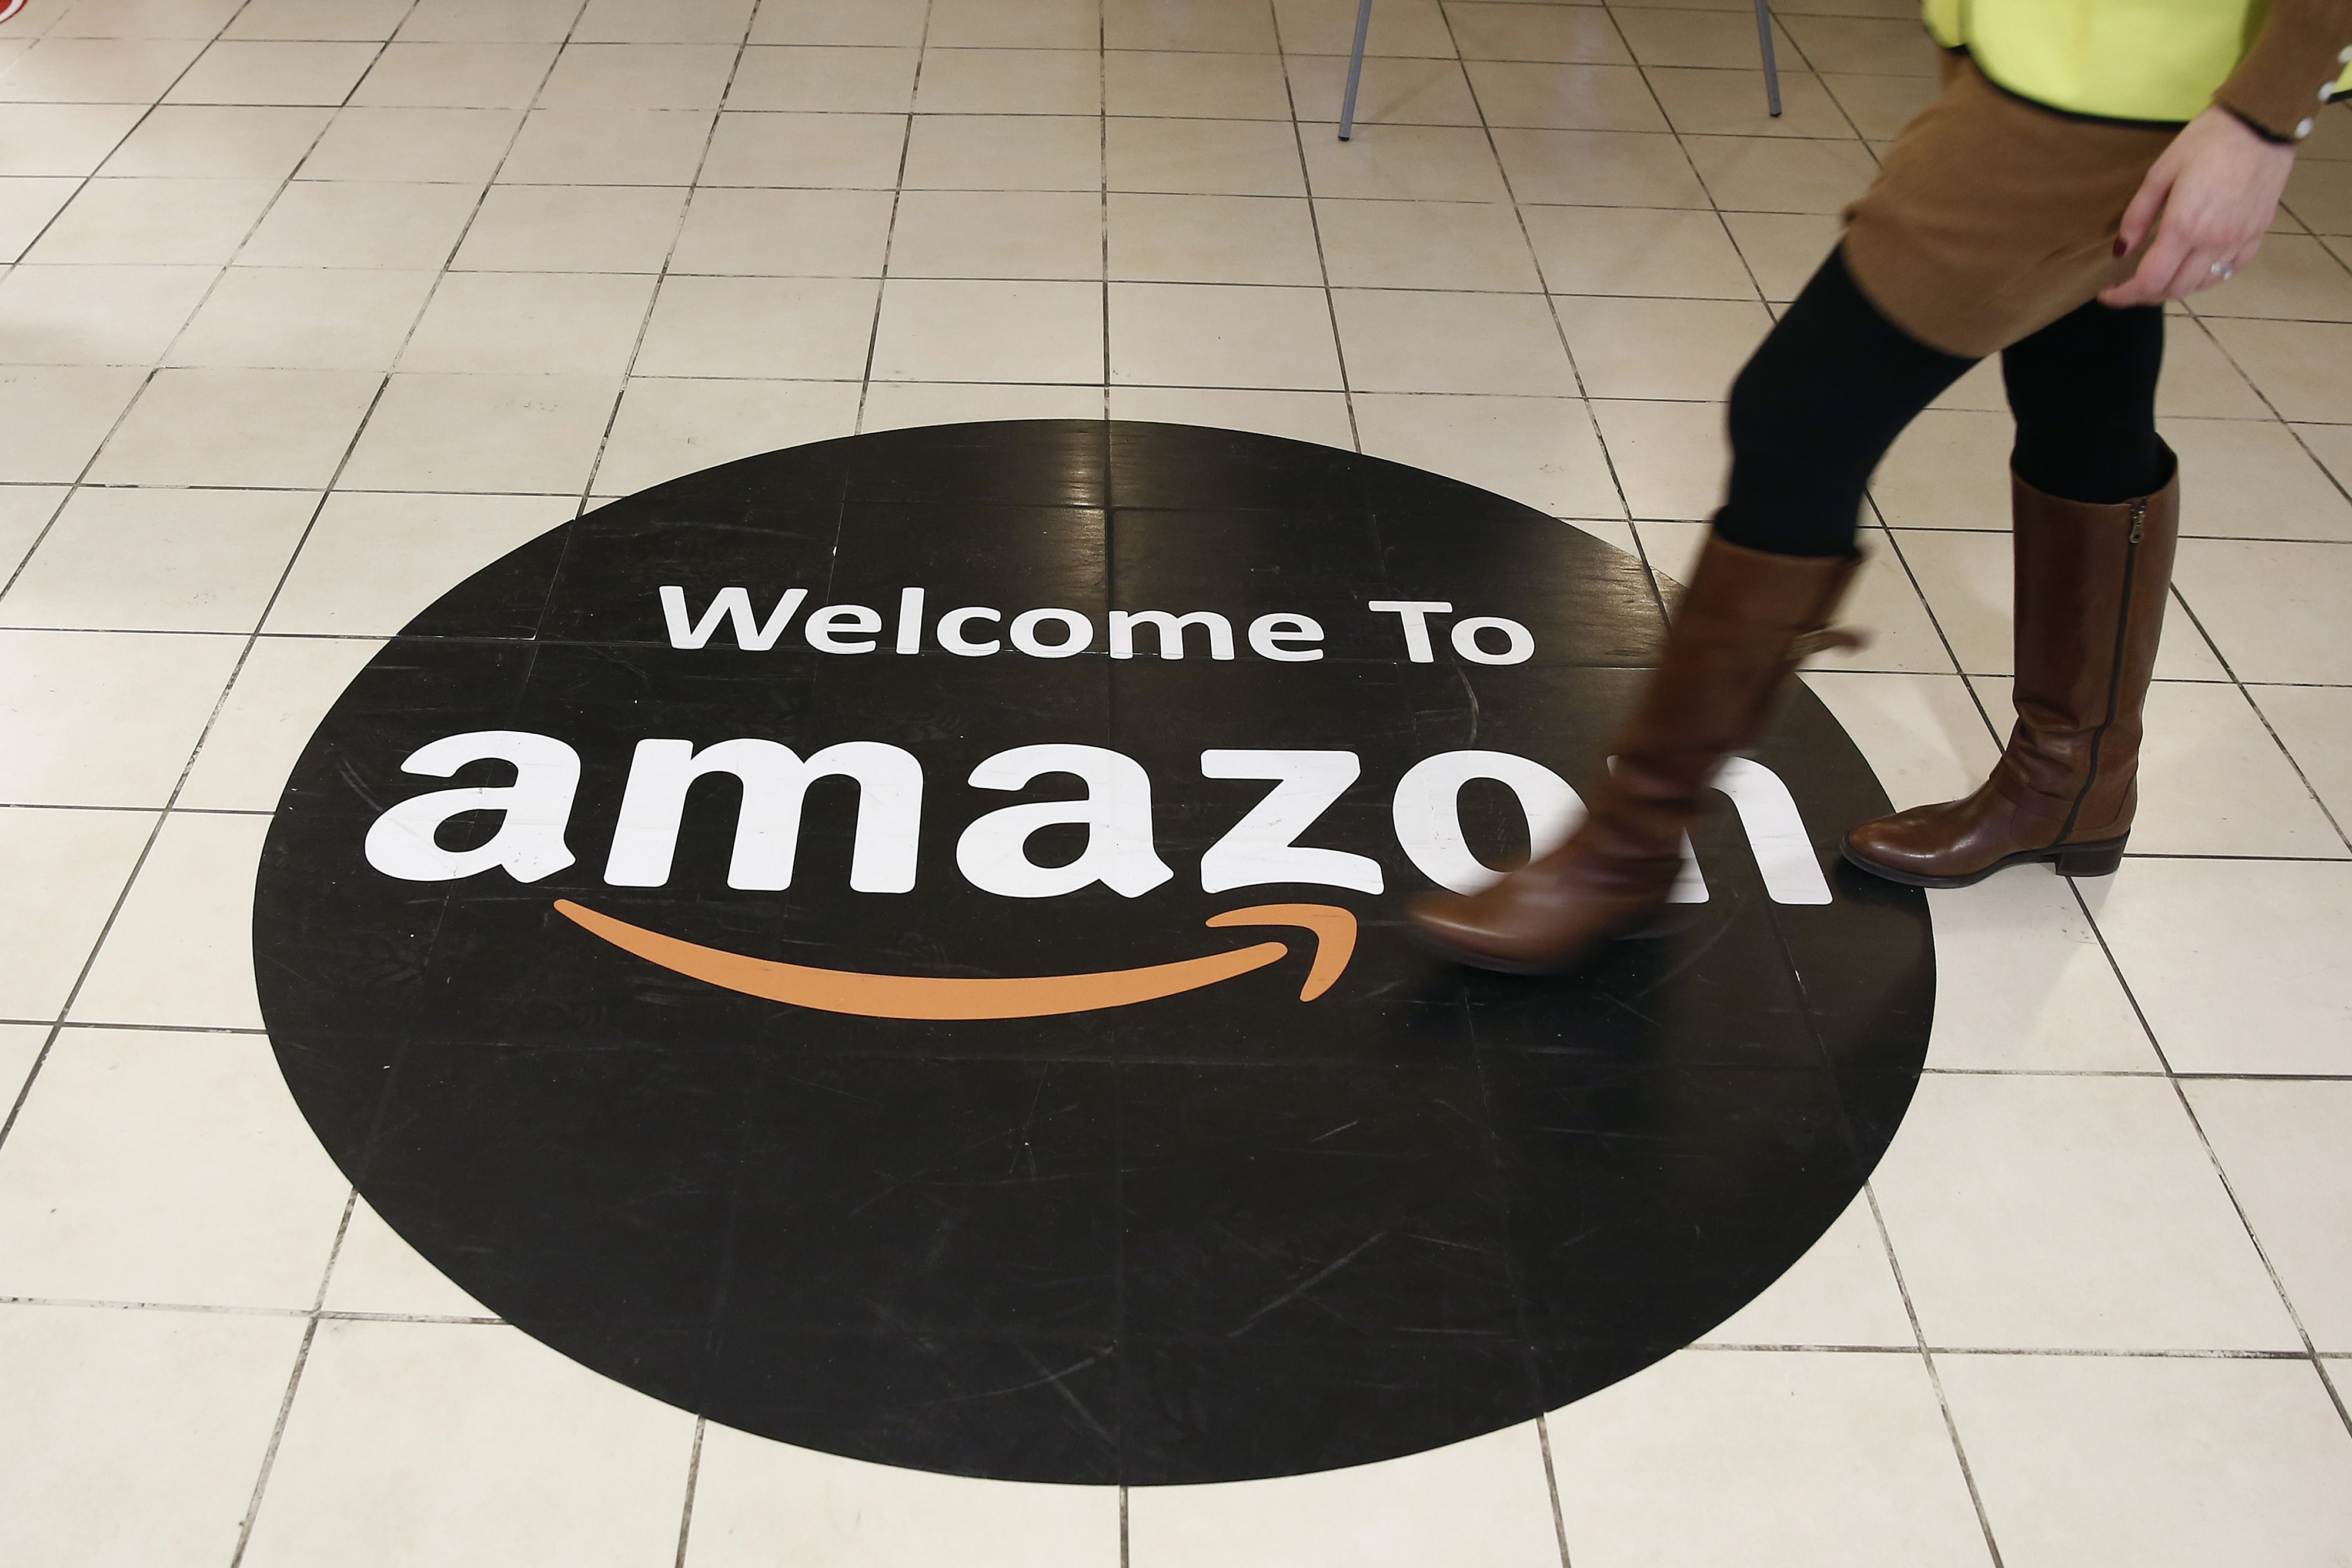 An employee walks over a logo on the floor of Amazon's fulfillment centers in Rugeley, U.K., on Dec. 2, 2013 (Bloomberg&mdash;Bloomberg via Getty Images)